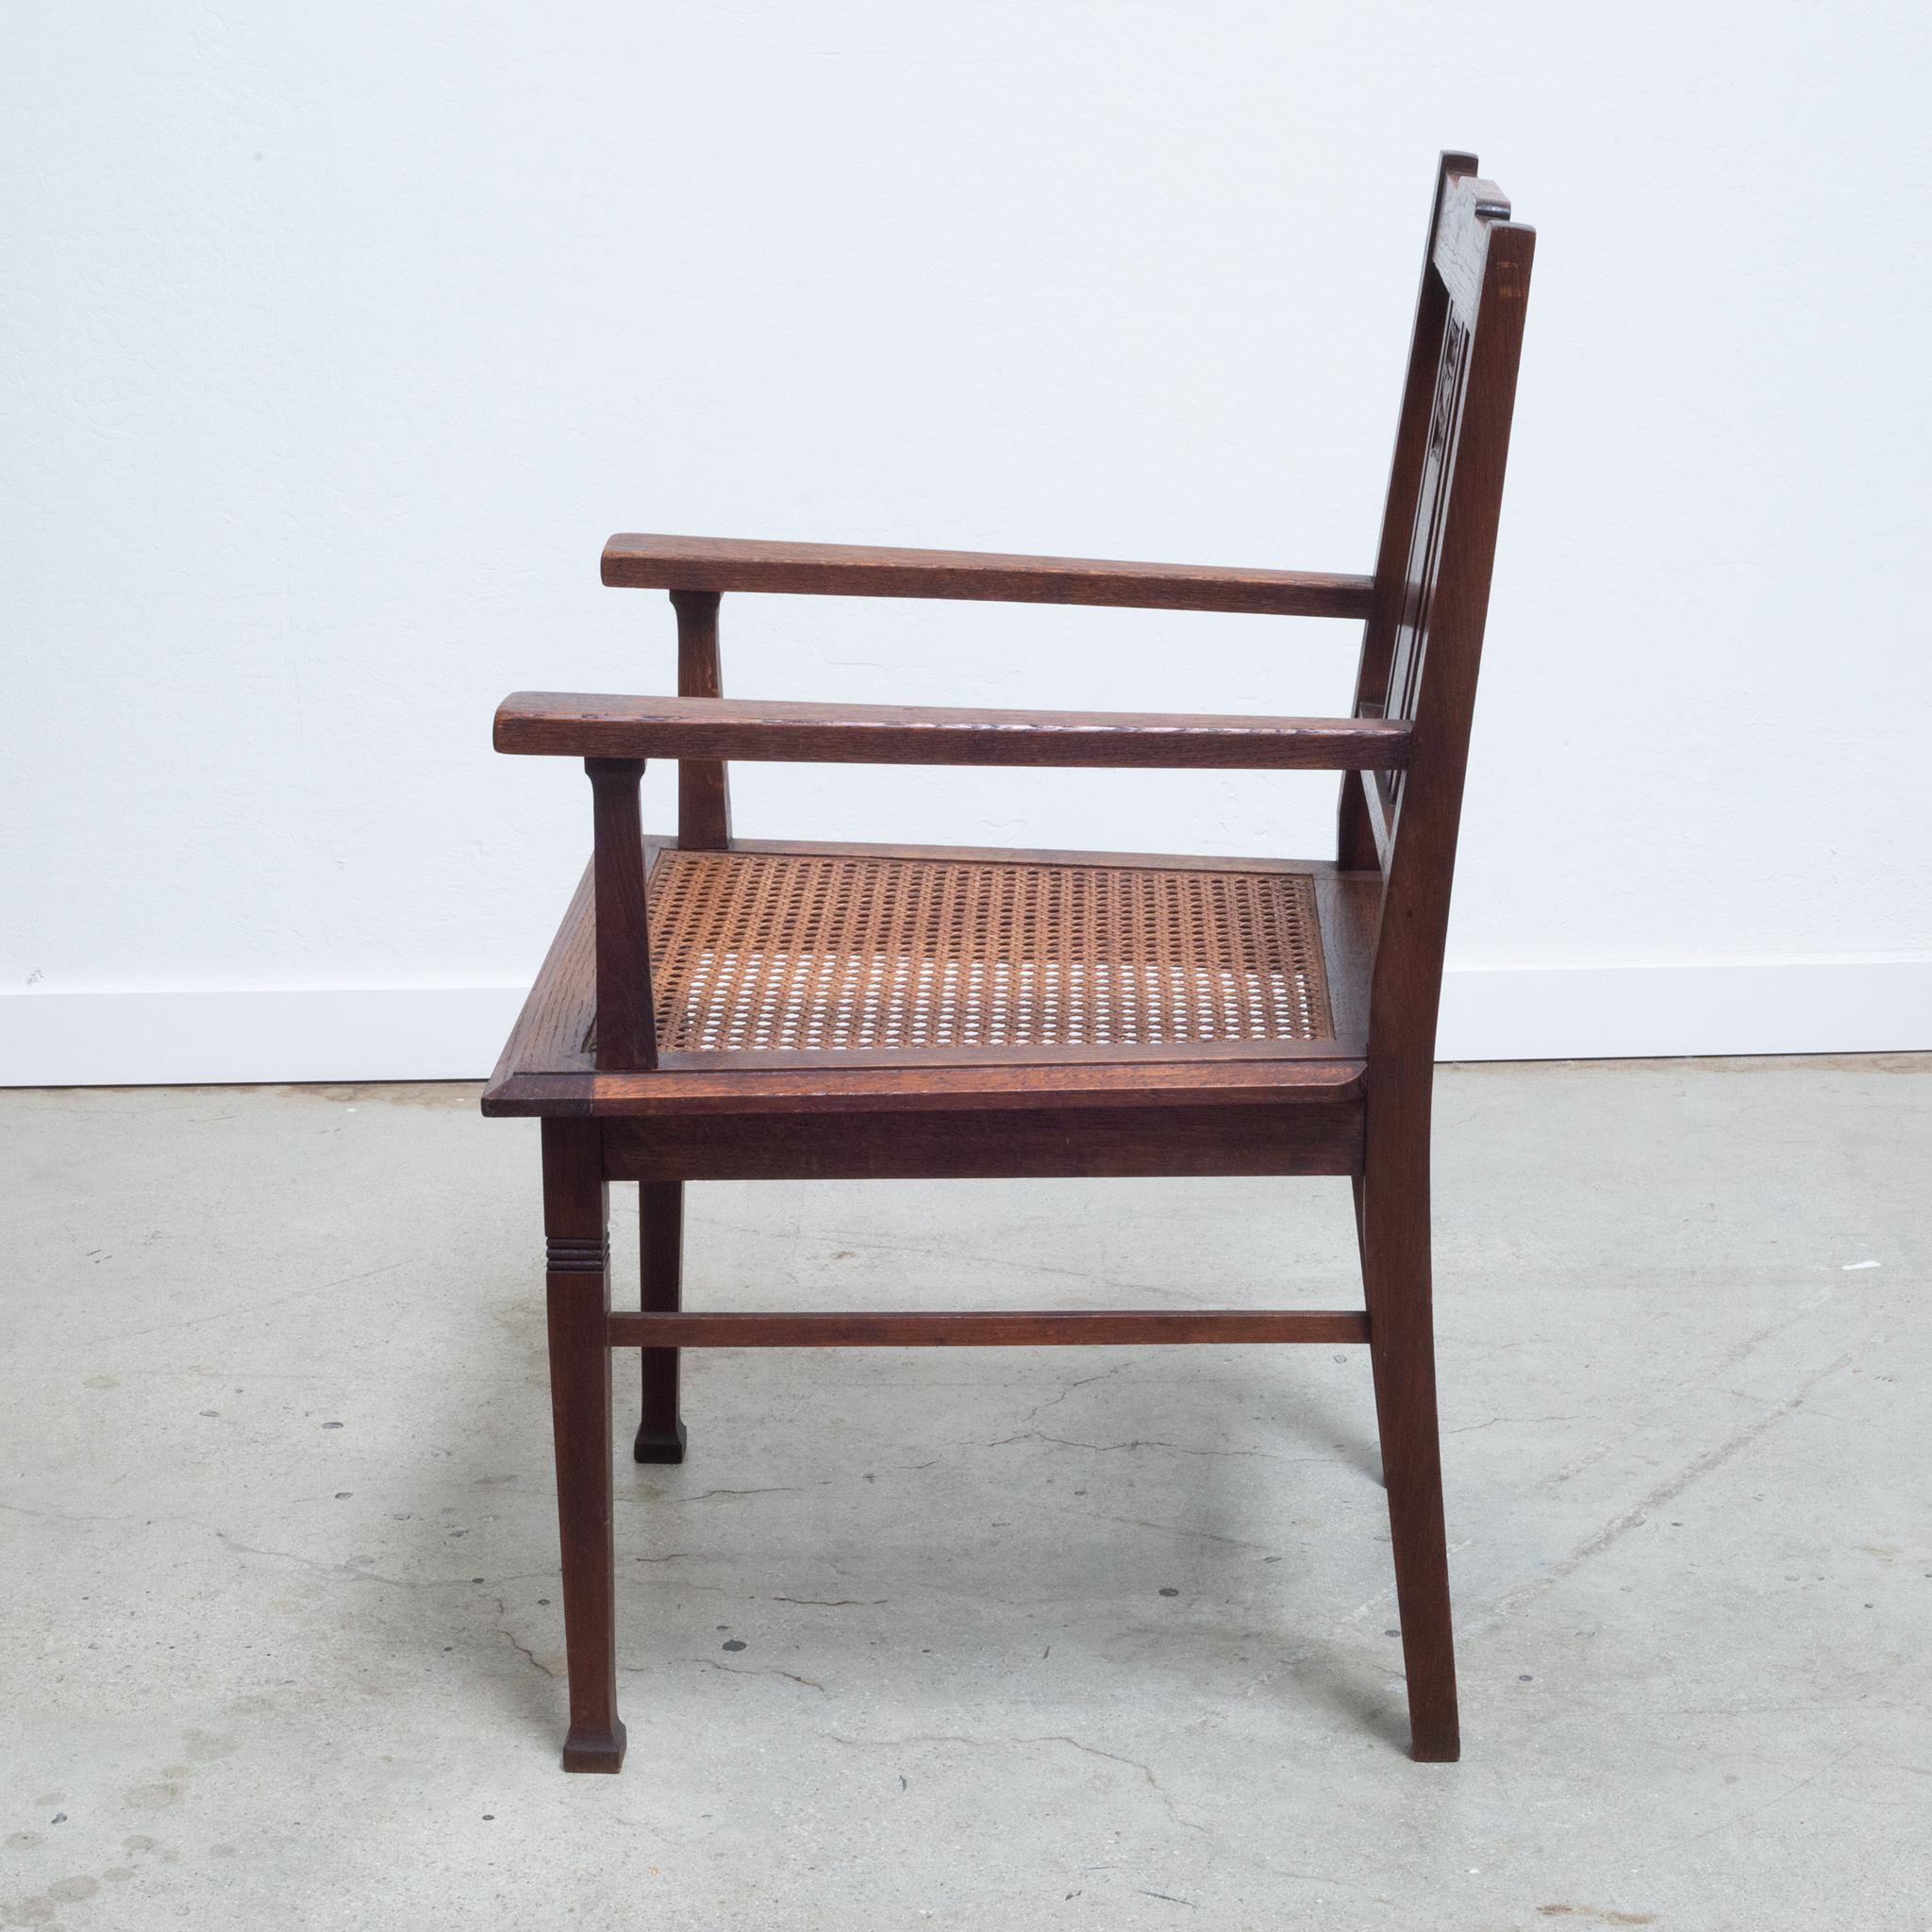 Early 20th C. Glasgow Style Arts and Crafts Caned Oak Arm Chair, c.1900 In Good Condition For Sale In San Francisco, CA